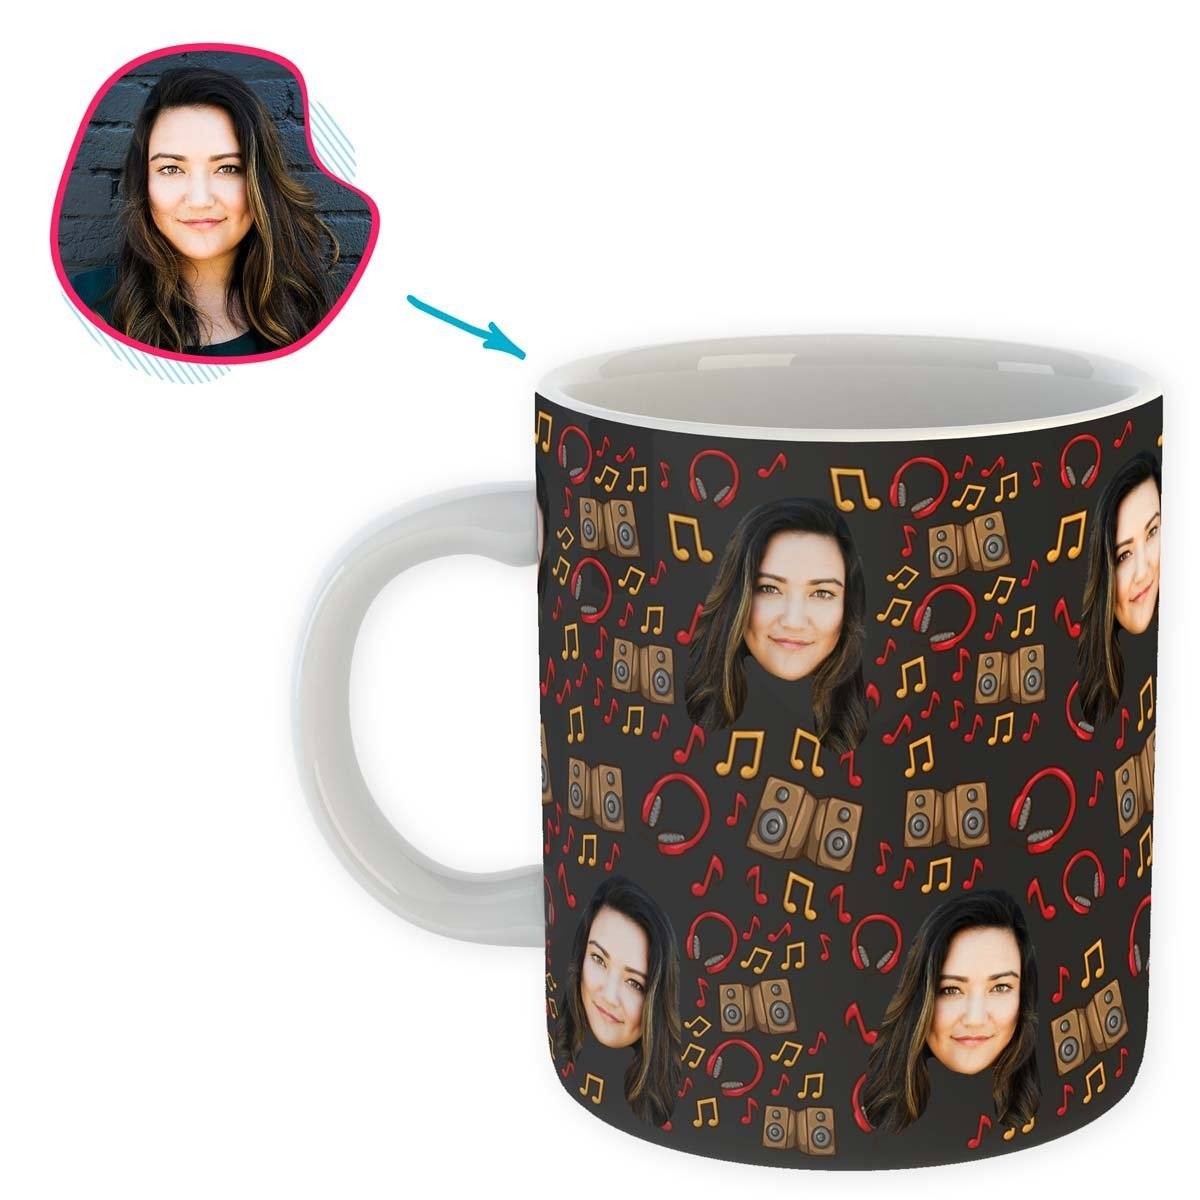 dark Music mug personalized with photo of face printed on it